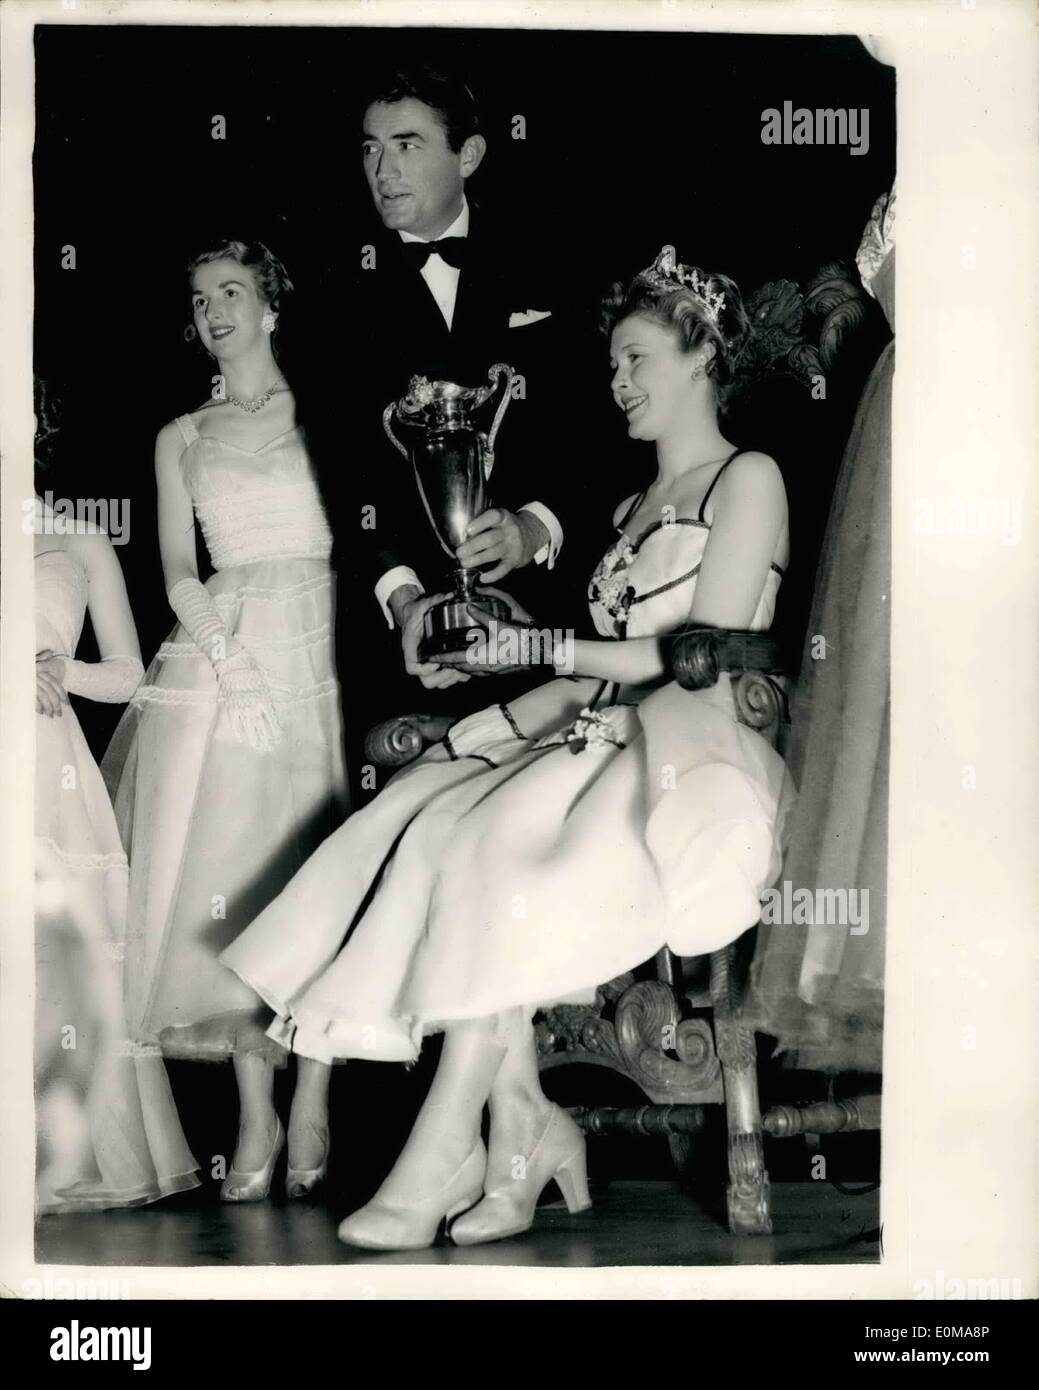 May 05, 1954 - National Ballroom Queen Contest: The grand finals of two unique contests were held in London last night, at the Empress Hall, Earl's Court. One was the national Ballroom Queen Contest and the other contest was for choice of the Football Queen of Great Britain. Keystone Photo Shows:- Miss Janet Ball, seen with Gregory Peck after she had been crowned winner of the National Ballroom Queen contest. Stock Photo